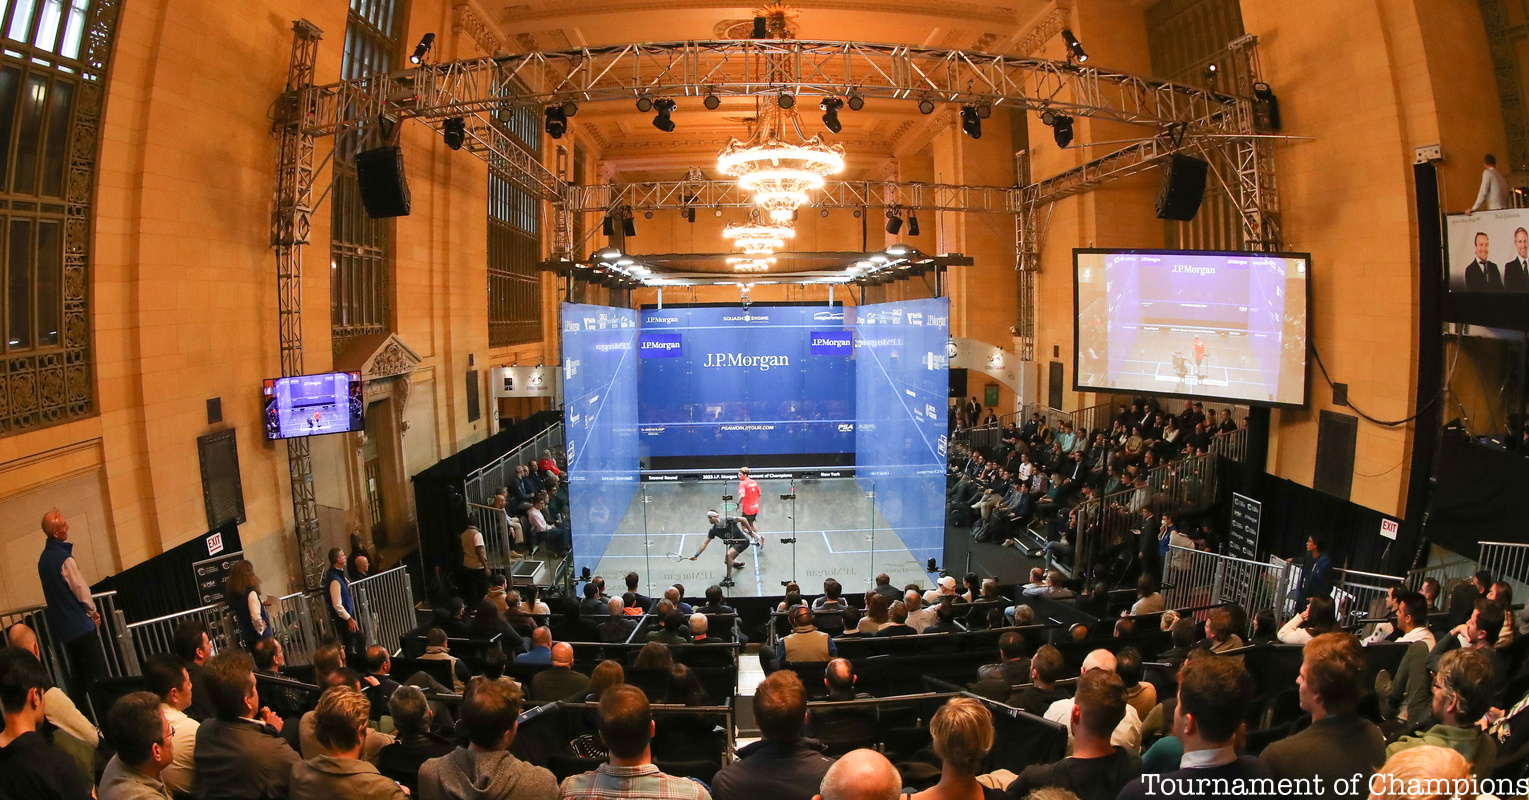 Squash Championship enclosure surrounded by crowds at Grand Central Terminal